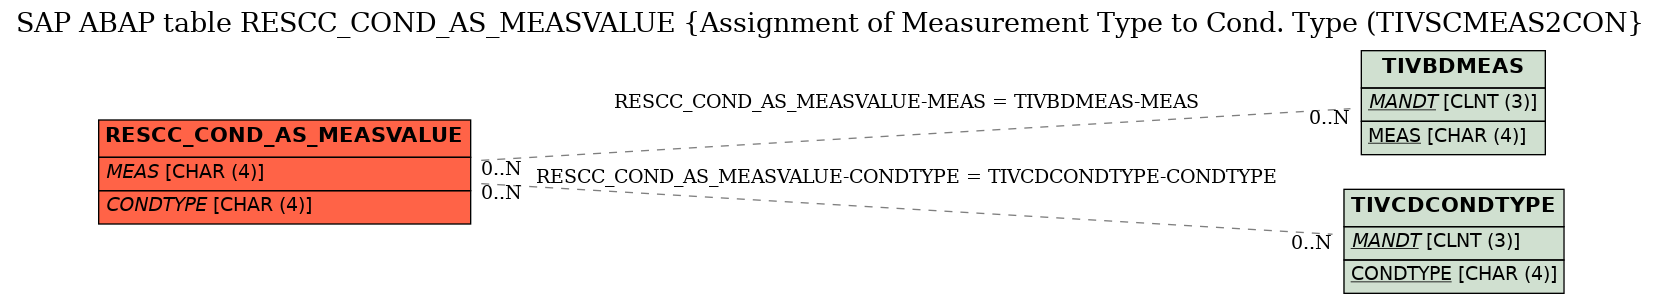 E-R Diagram for table RESCC_COND_AS_MEASVALUE (Assignment of Measurement Type to Cond. Type (TIVSCMEAS2CON)